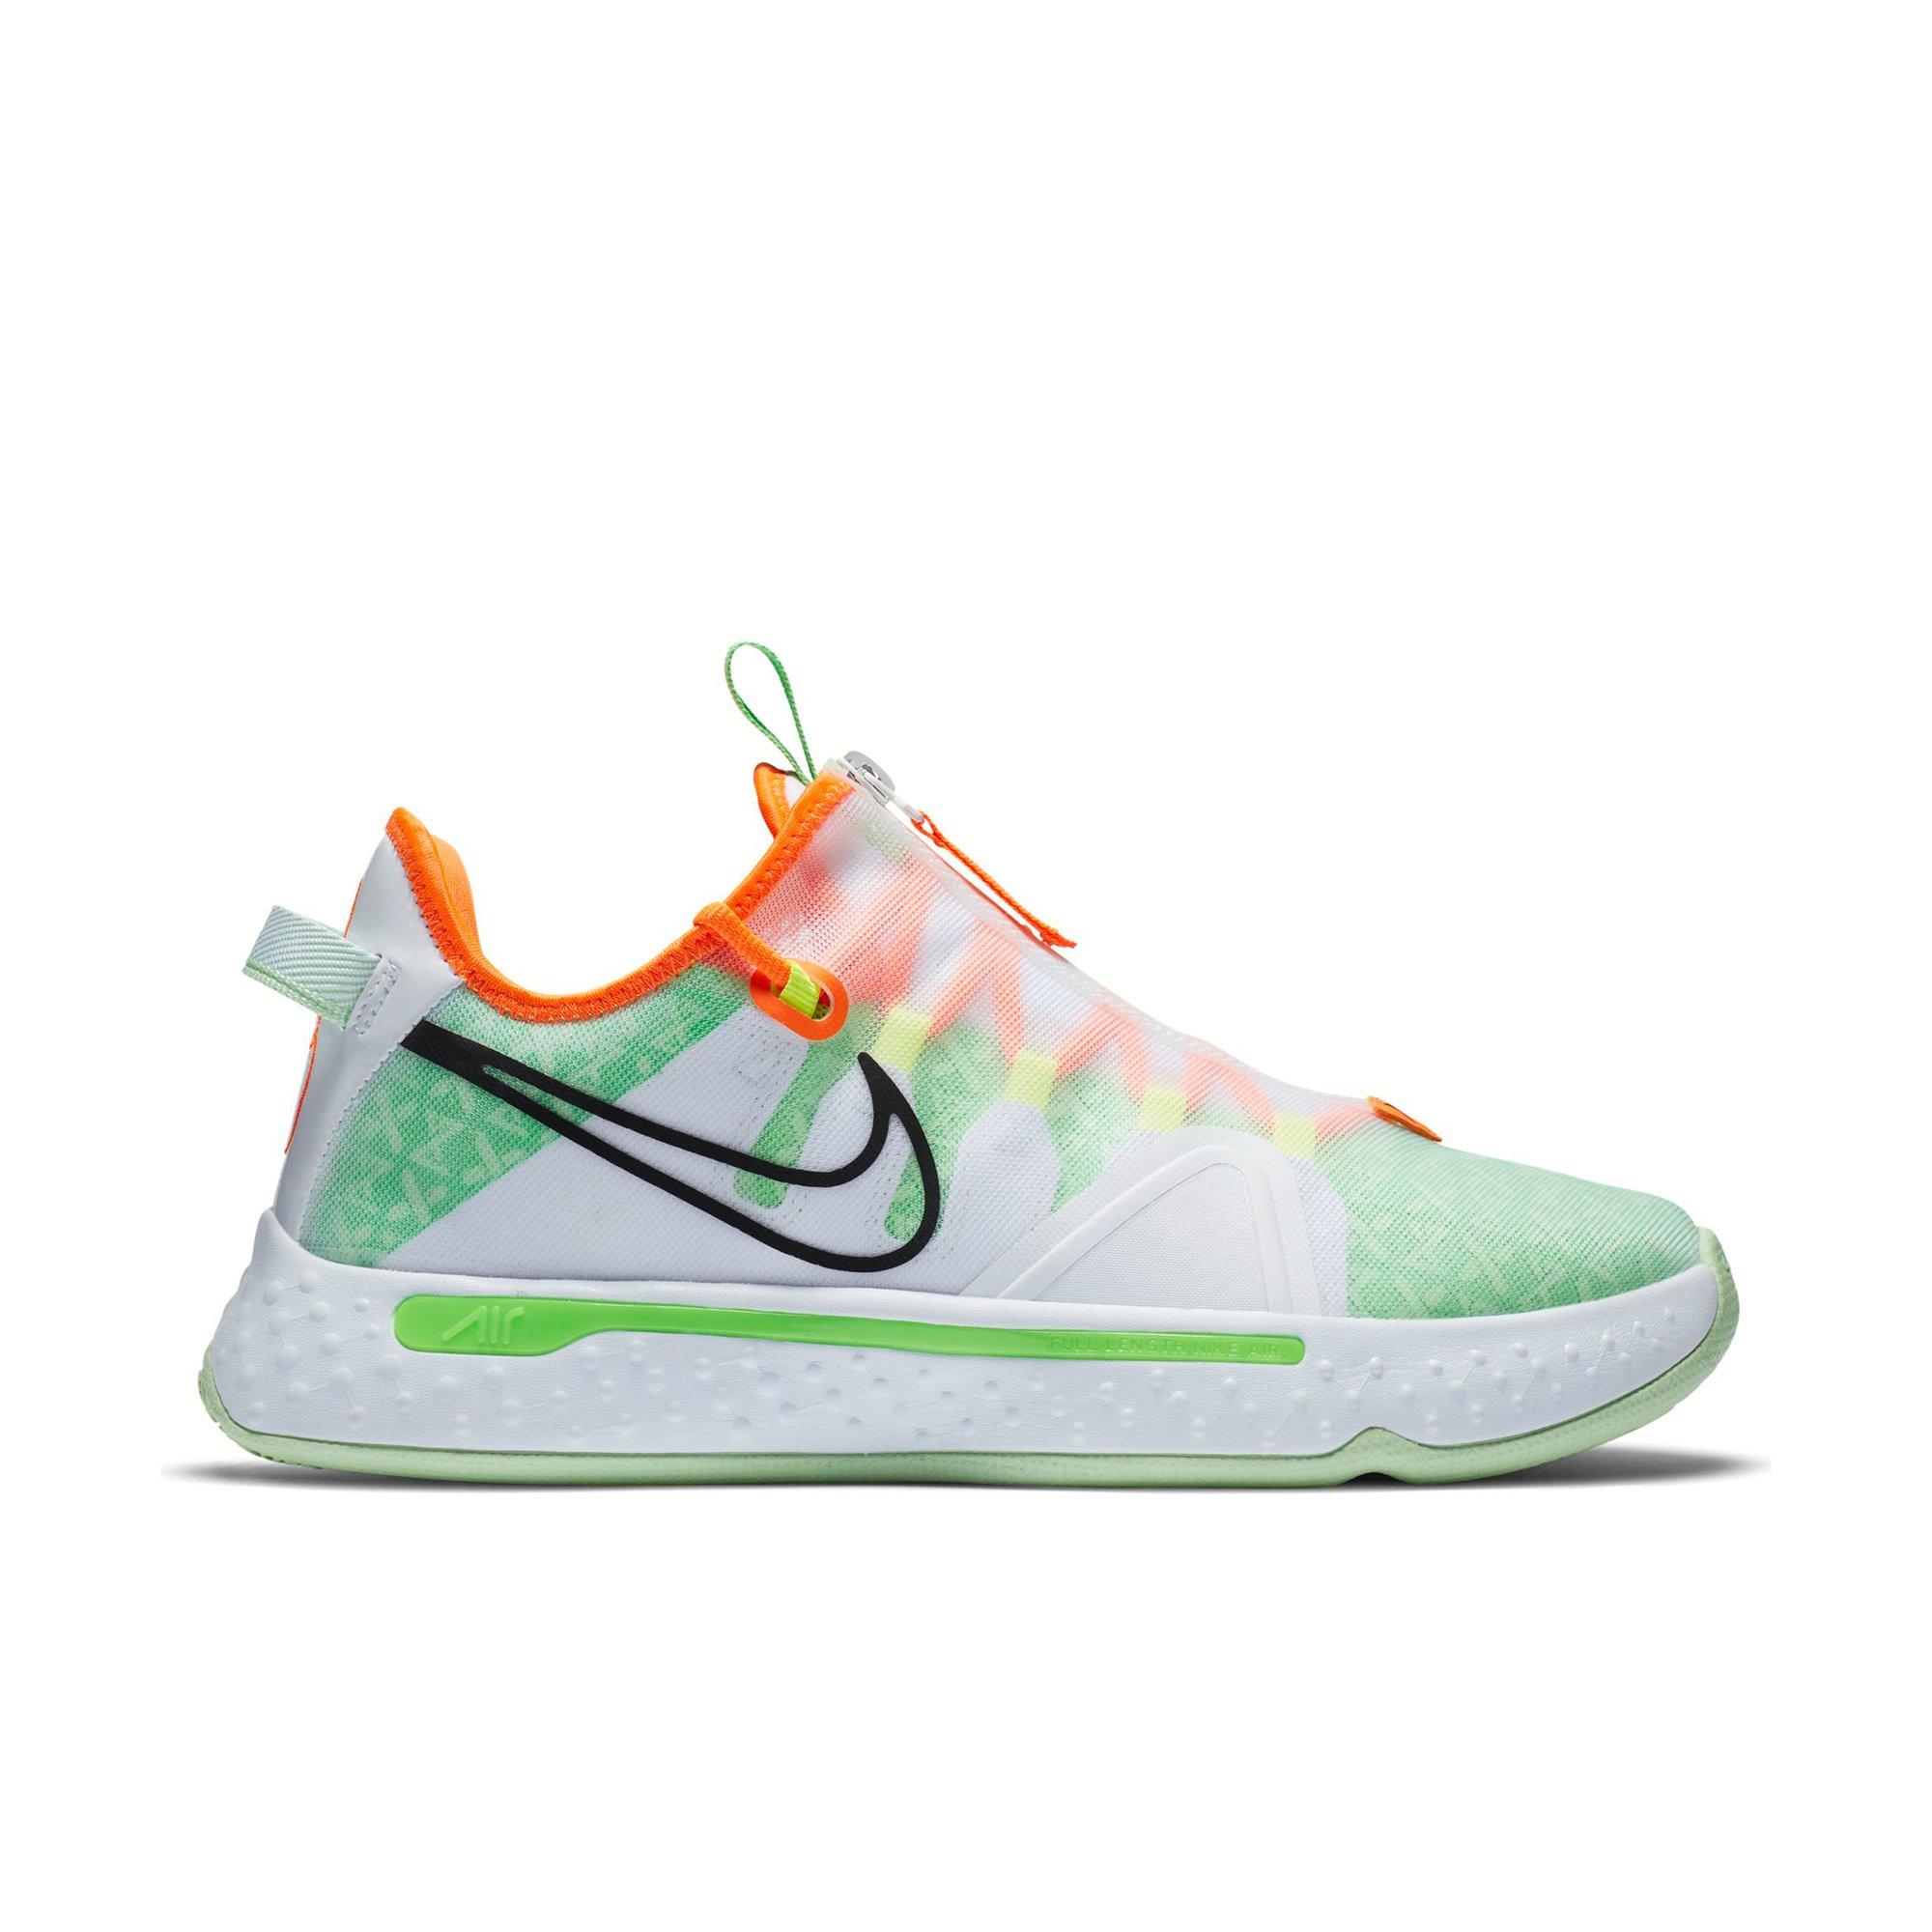 green paul george shoes